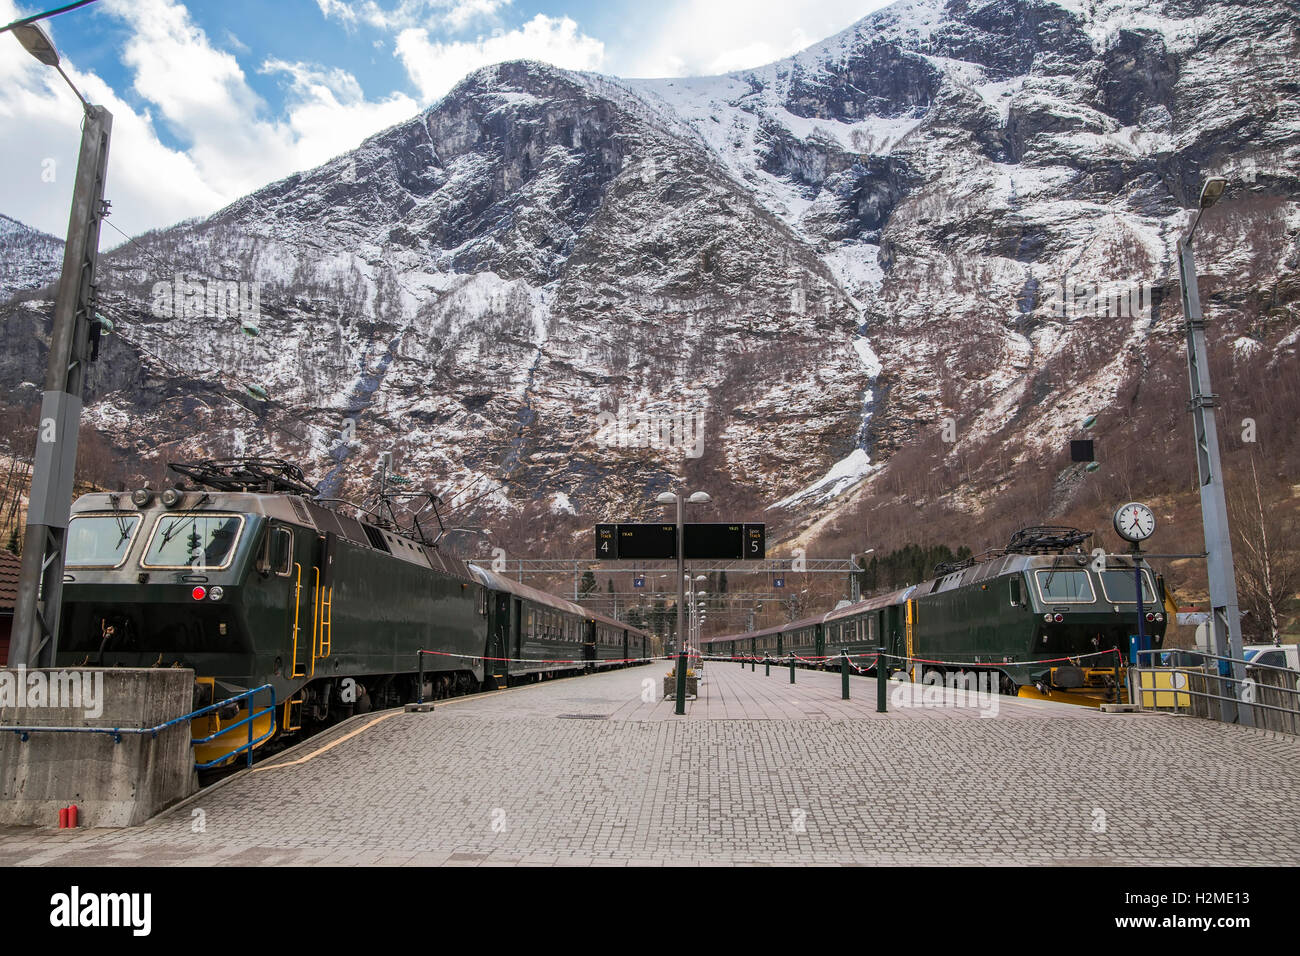 Platform with two trains and high mountains in the background. Norway Stock Photo